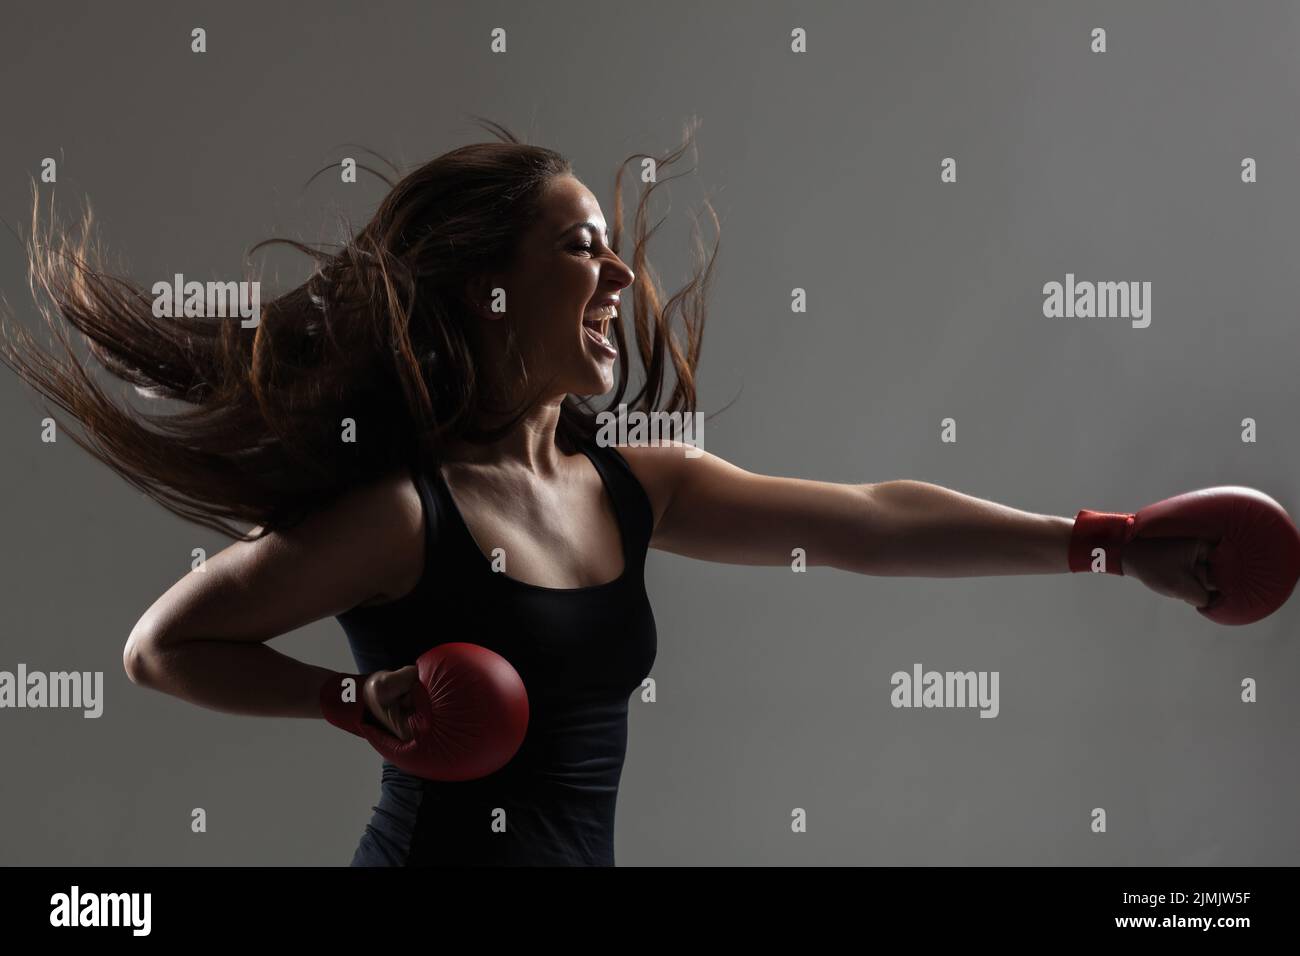 beautiful girl exercising karate punch and screaming against gray background Stock Photo